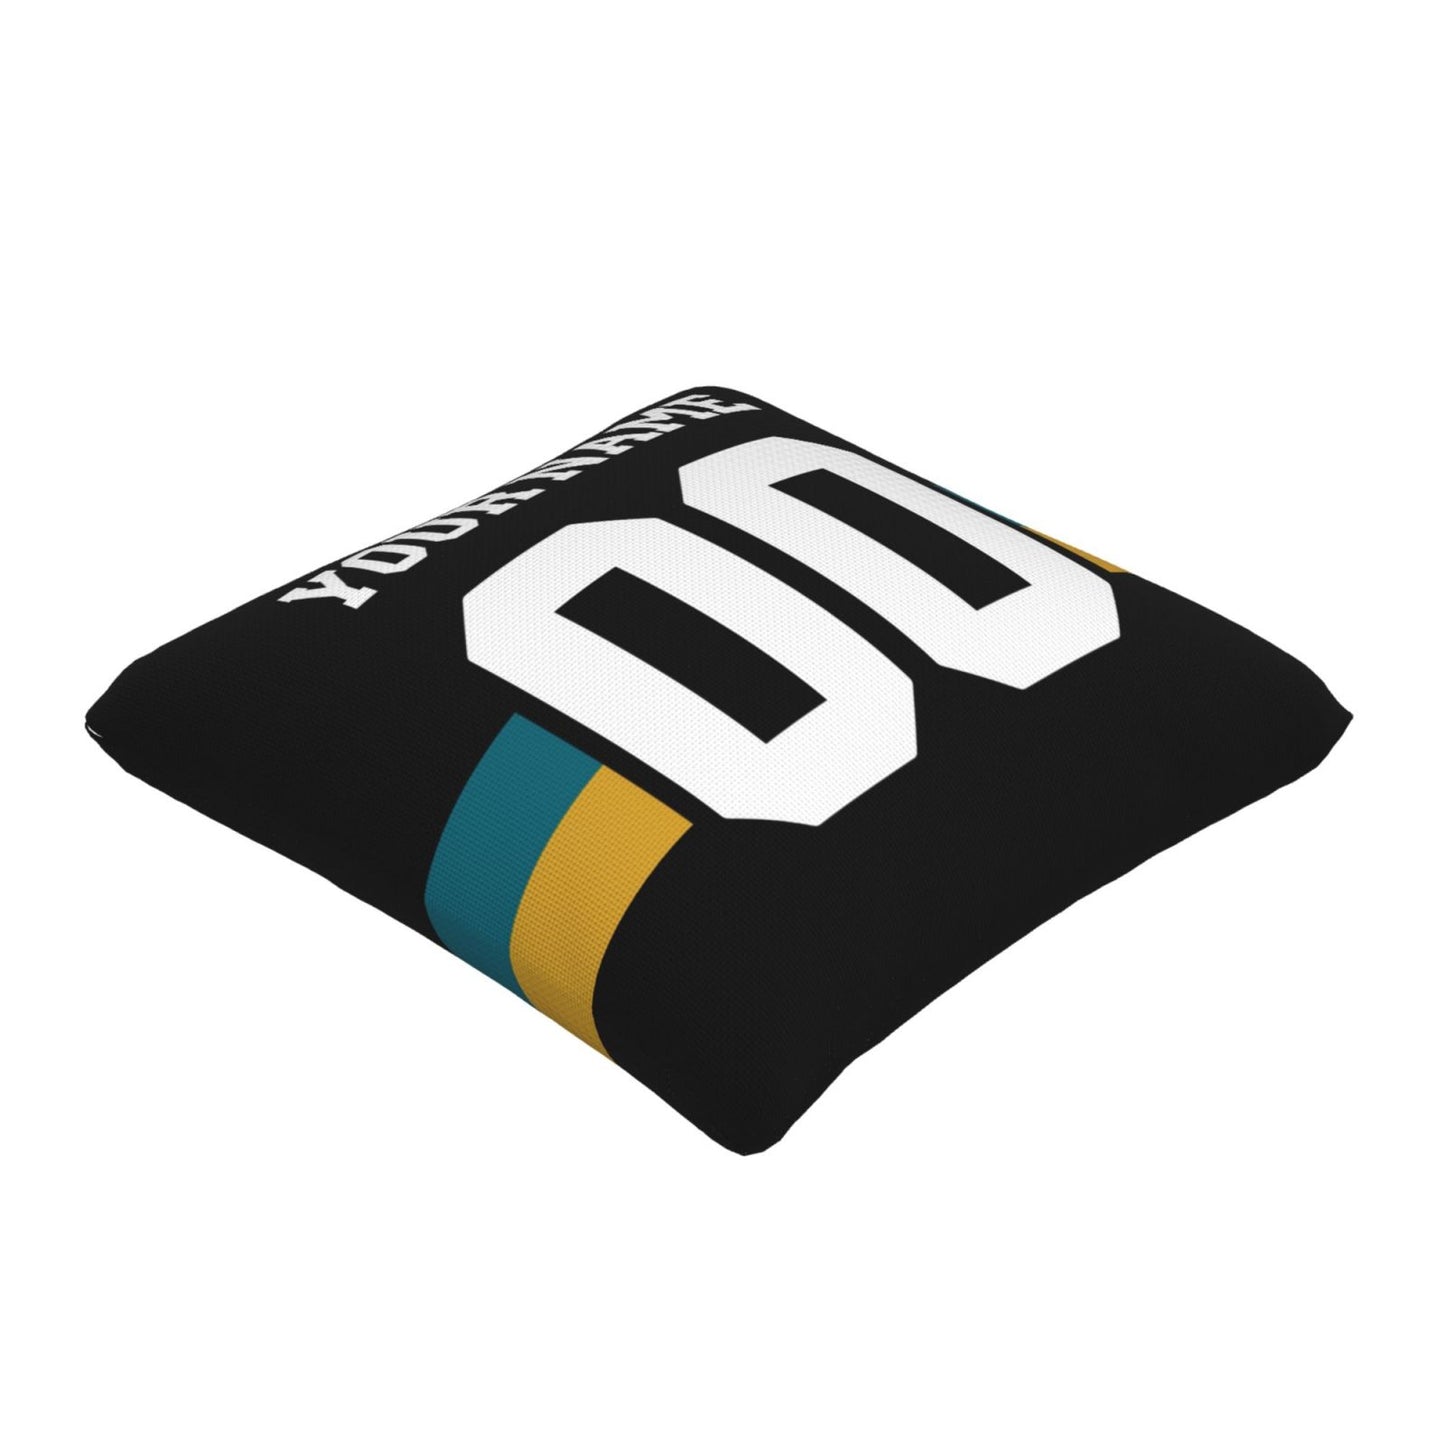 Customized Jacksonville Jaguars Football Team Decorative Throw Pillow Case Print Personalized Football Style Fans Letters & Number Black Pillowcase Housewarming Gifts